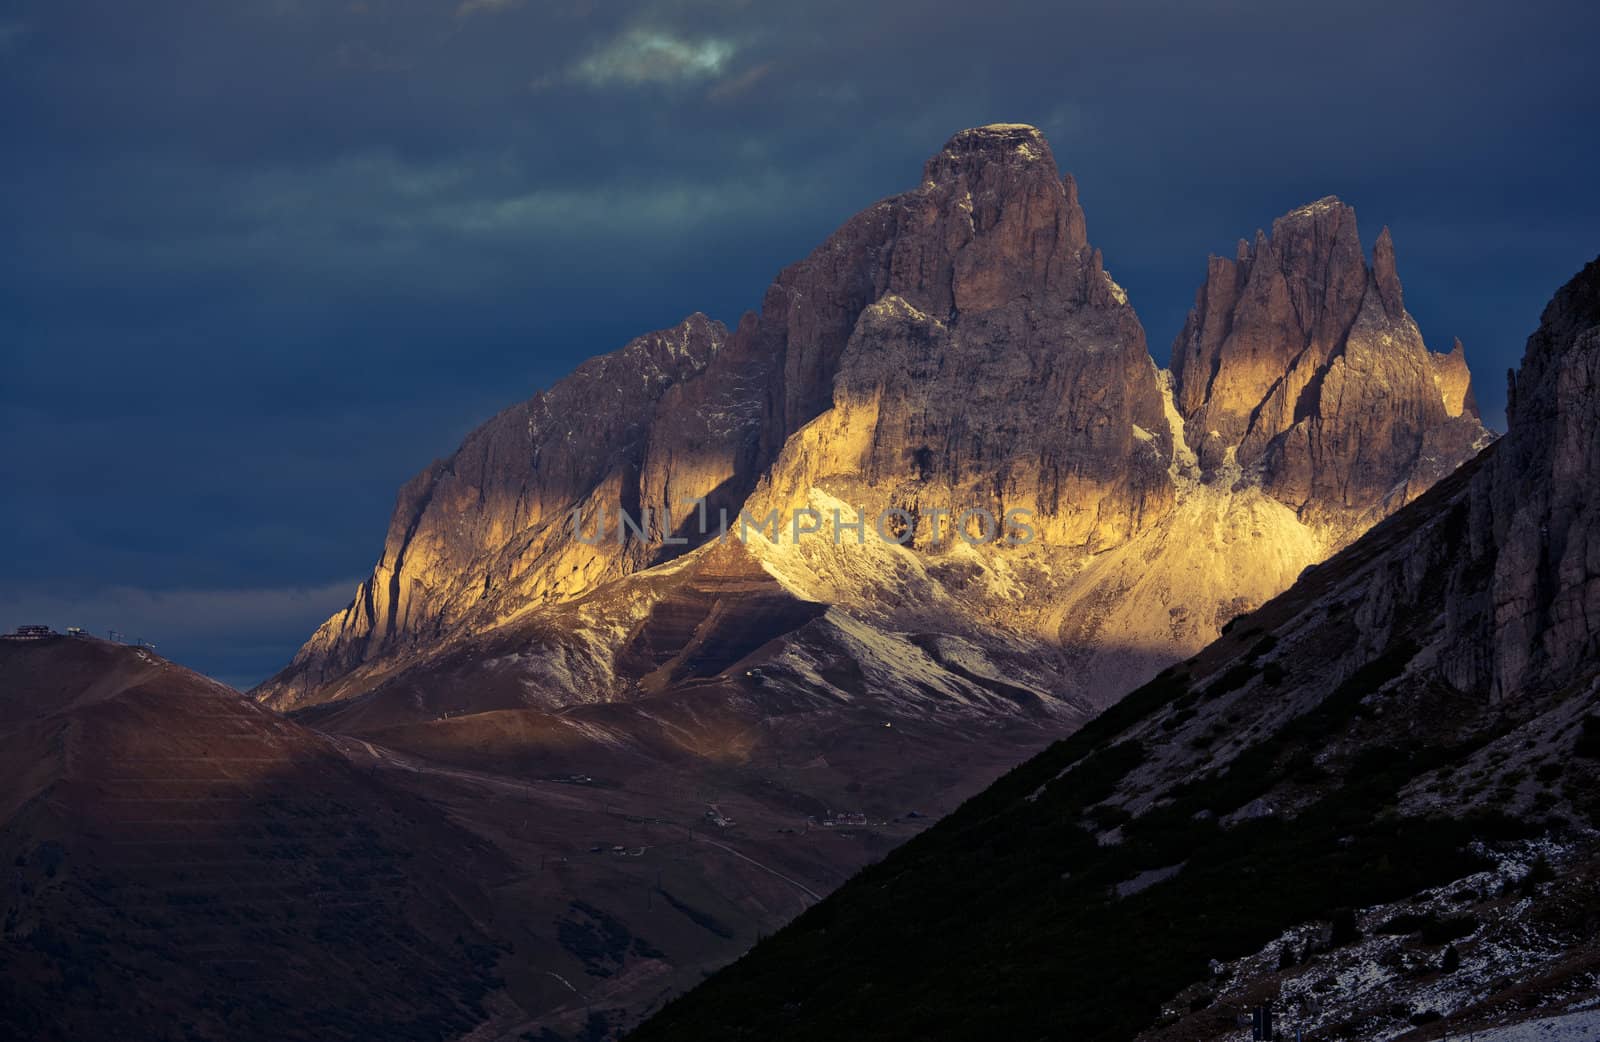 Sunrise in the Dolomites by ABCDK